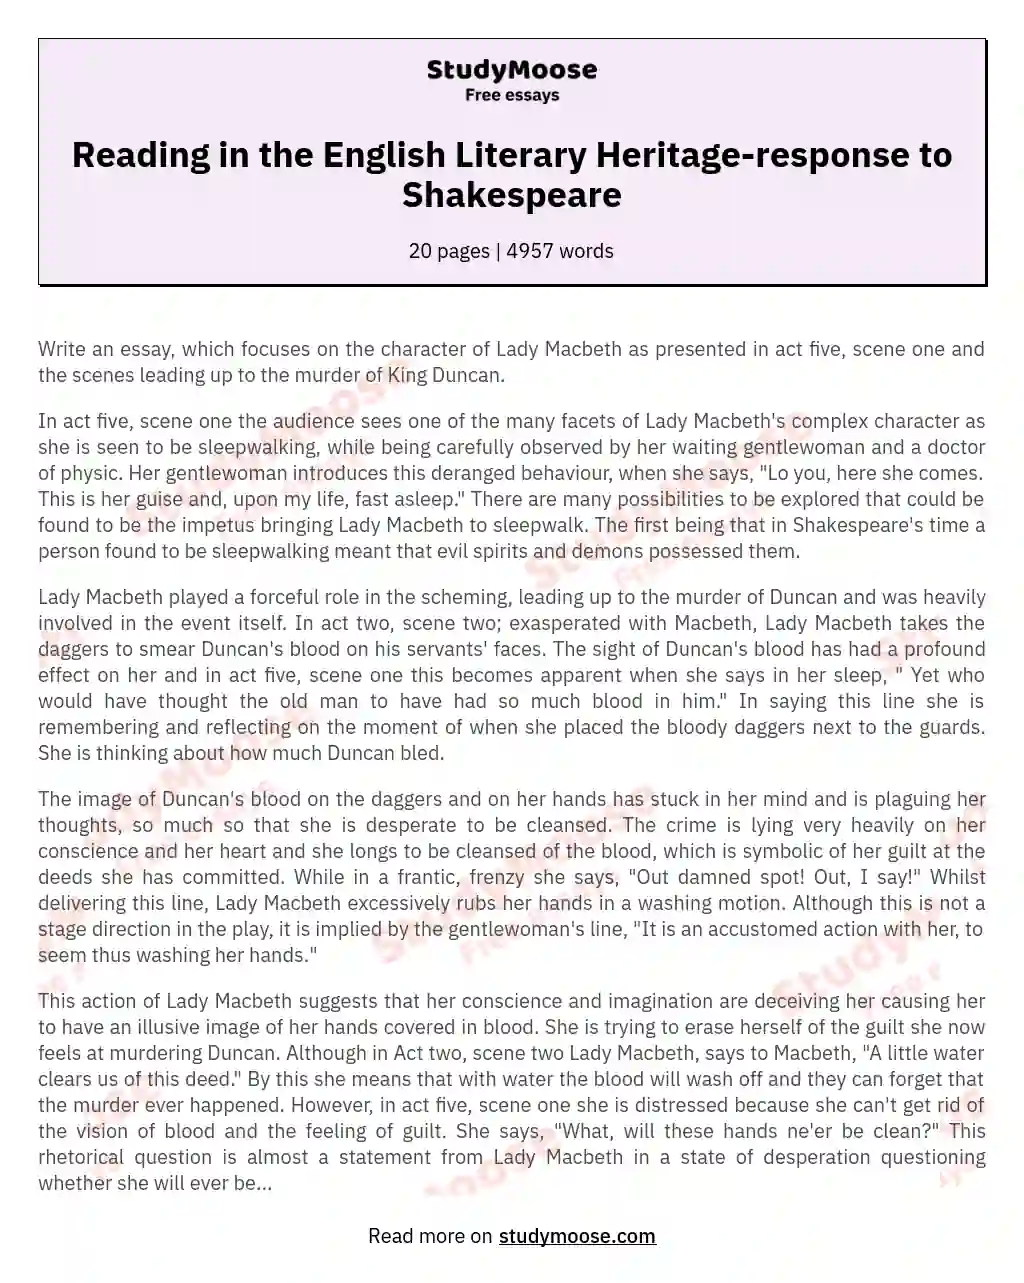 Reading in the English Literary Heritage-response to Shakespeare essay